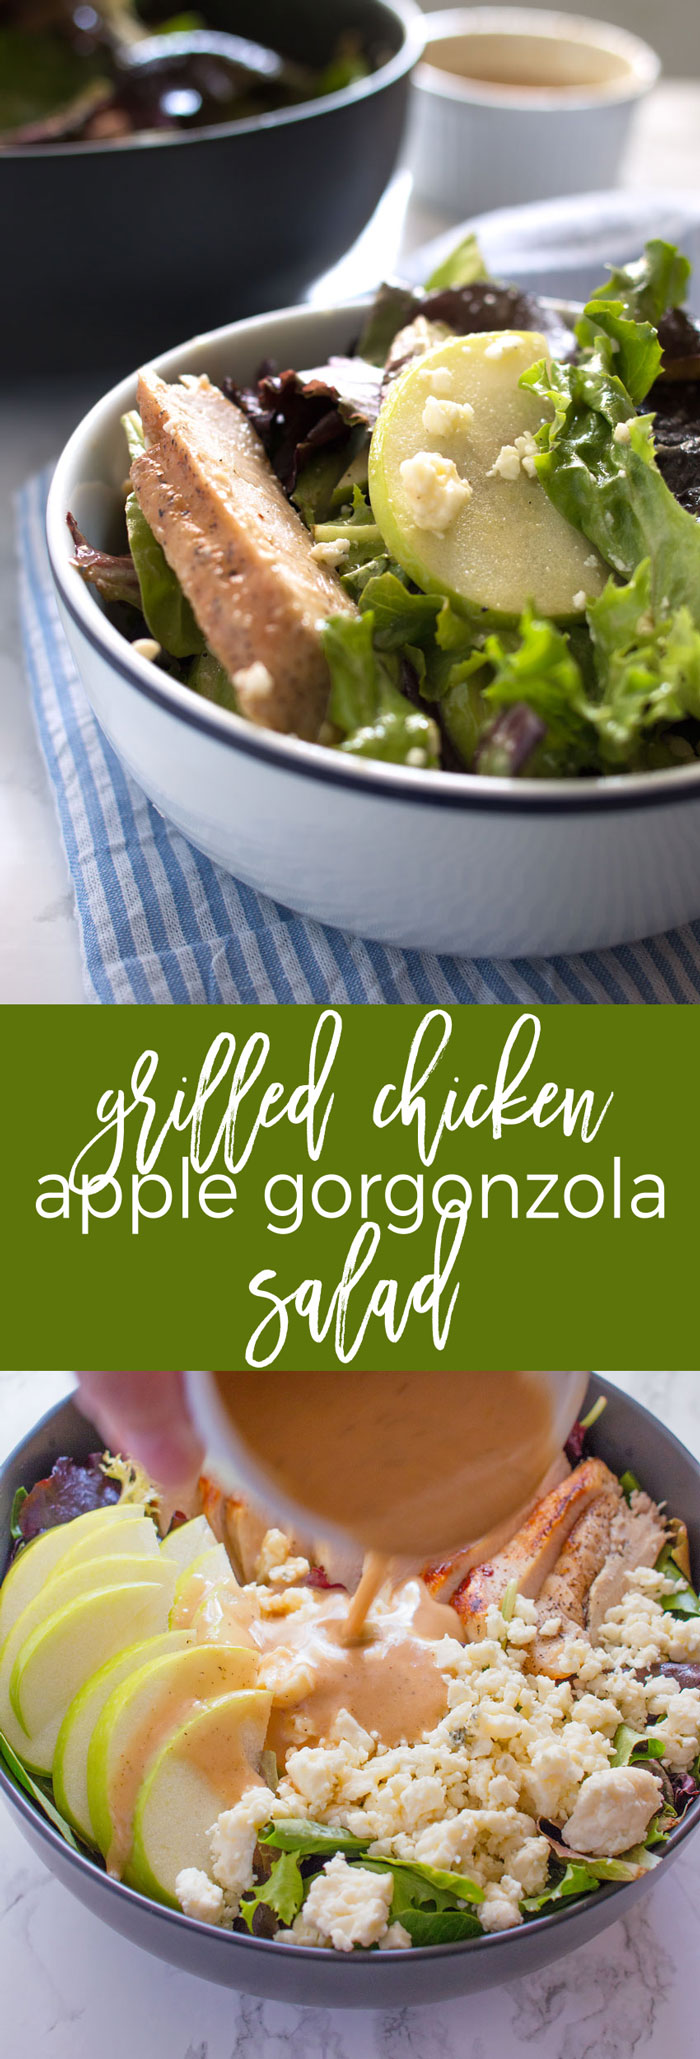 Delicious and Easy Lunch Ideas! Grilled Chicken Salad with Apples and Gorgonzola Cheese will be your new favorite go-to lunch salad!